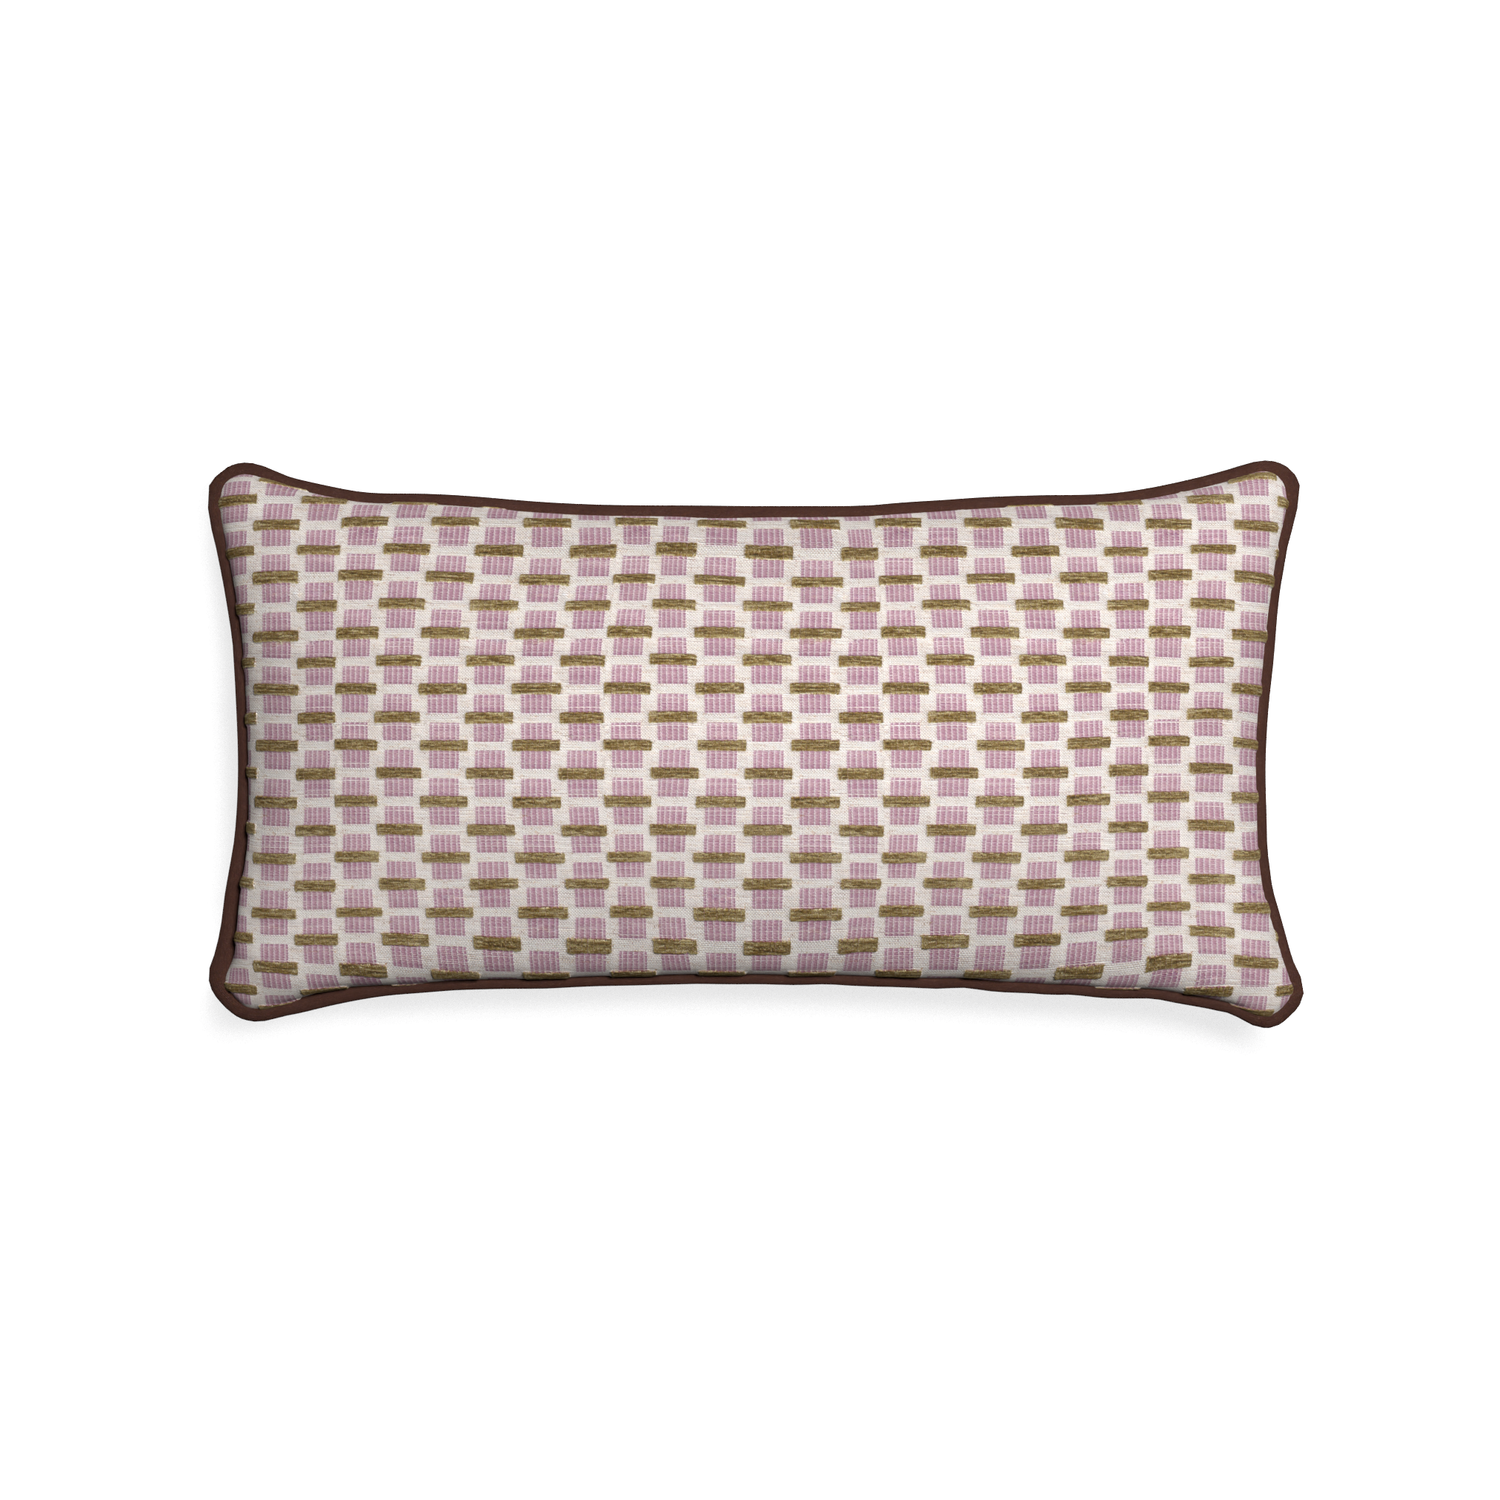 Midi-lumbar willow orchid custom pink geometric chenillepillow with w piping on white background